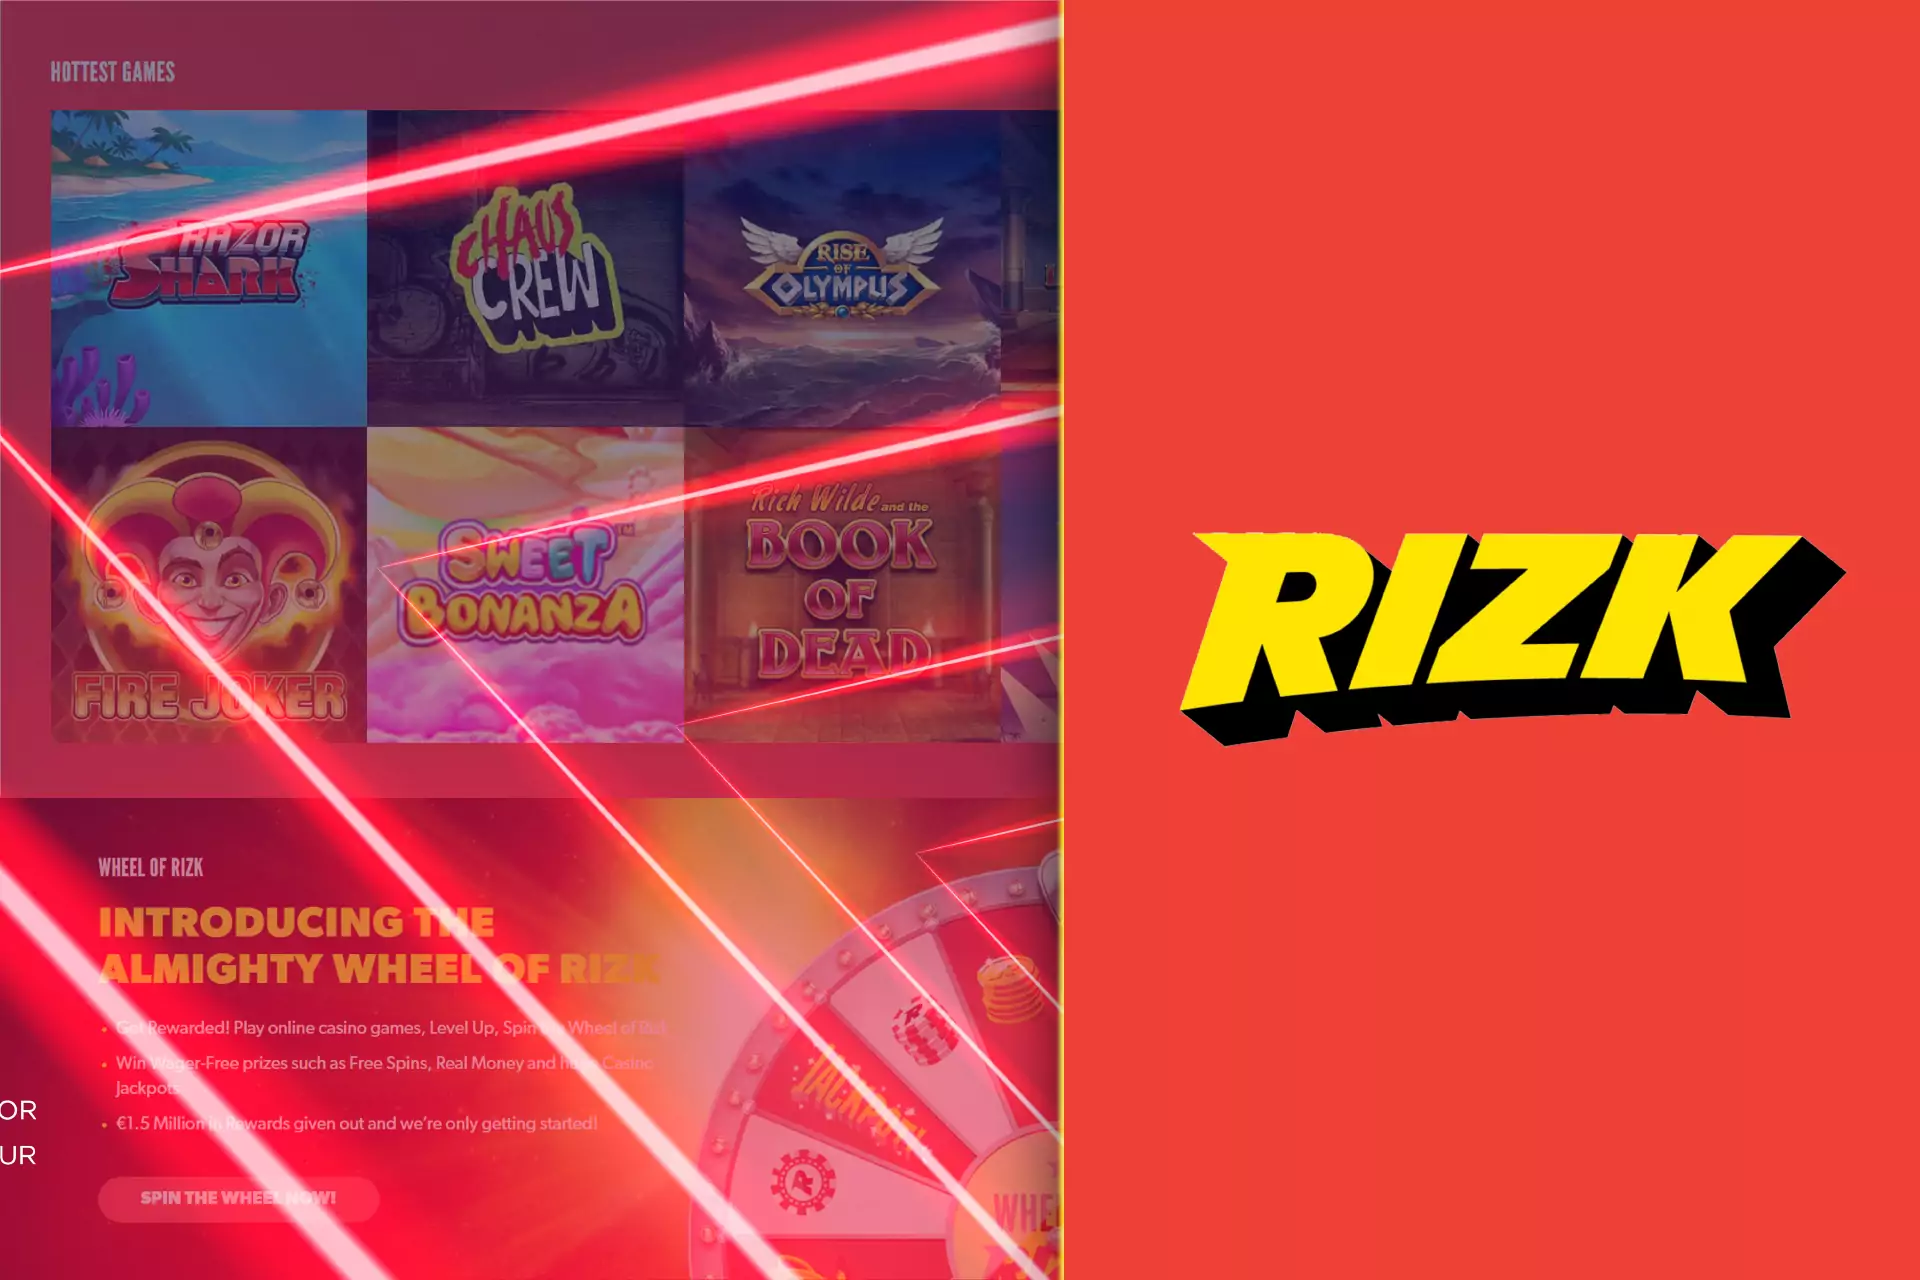 The Rizk casino works under the two licenses simultaneously.